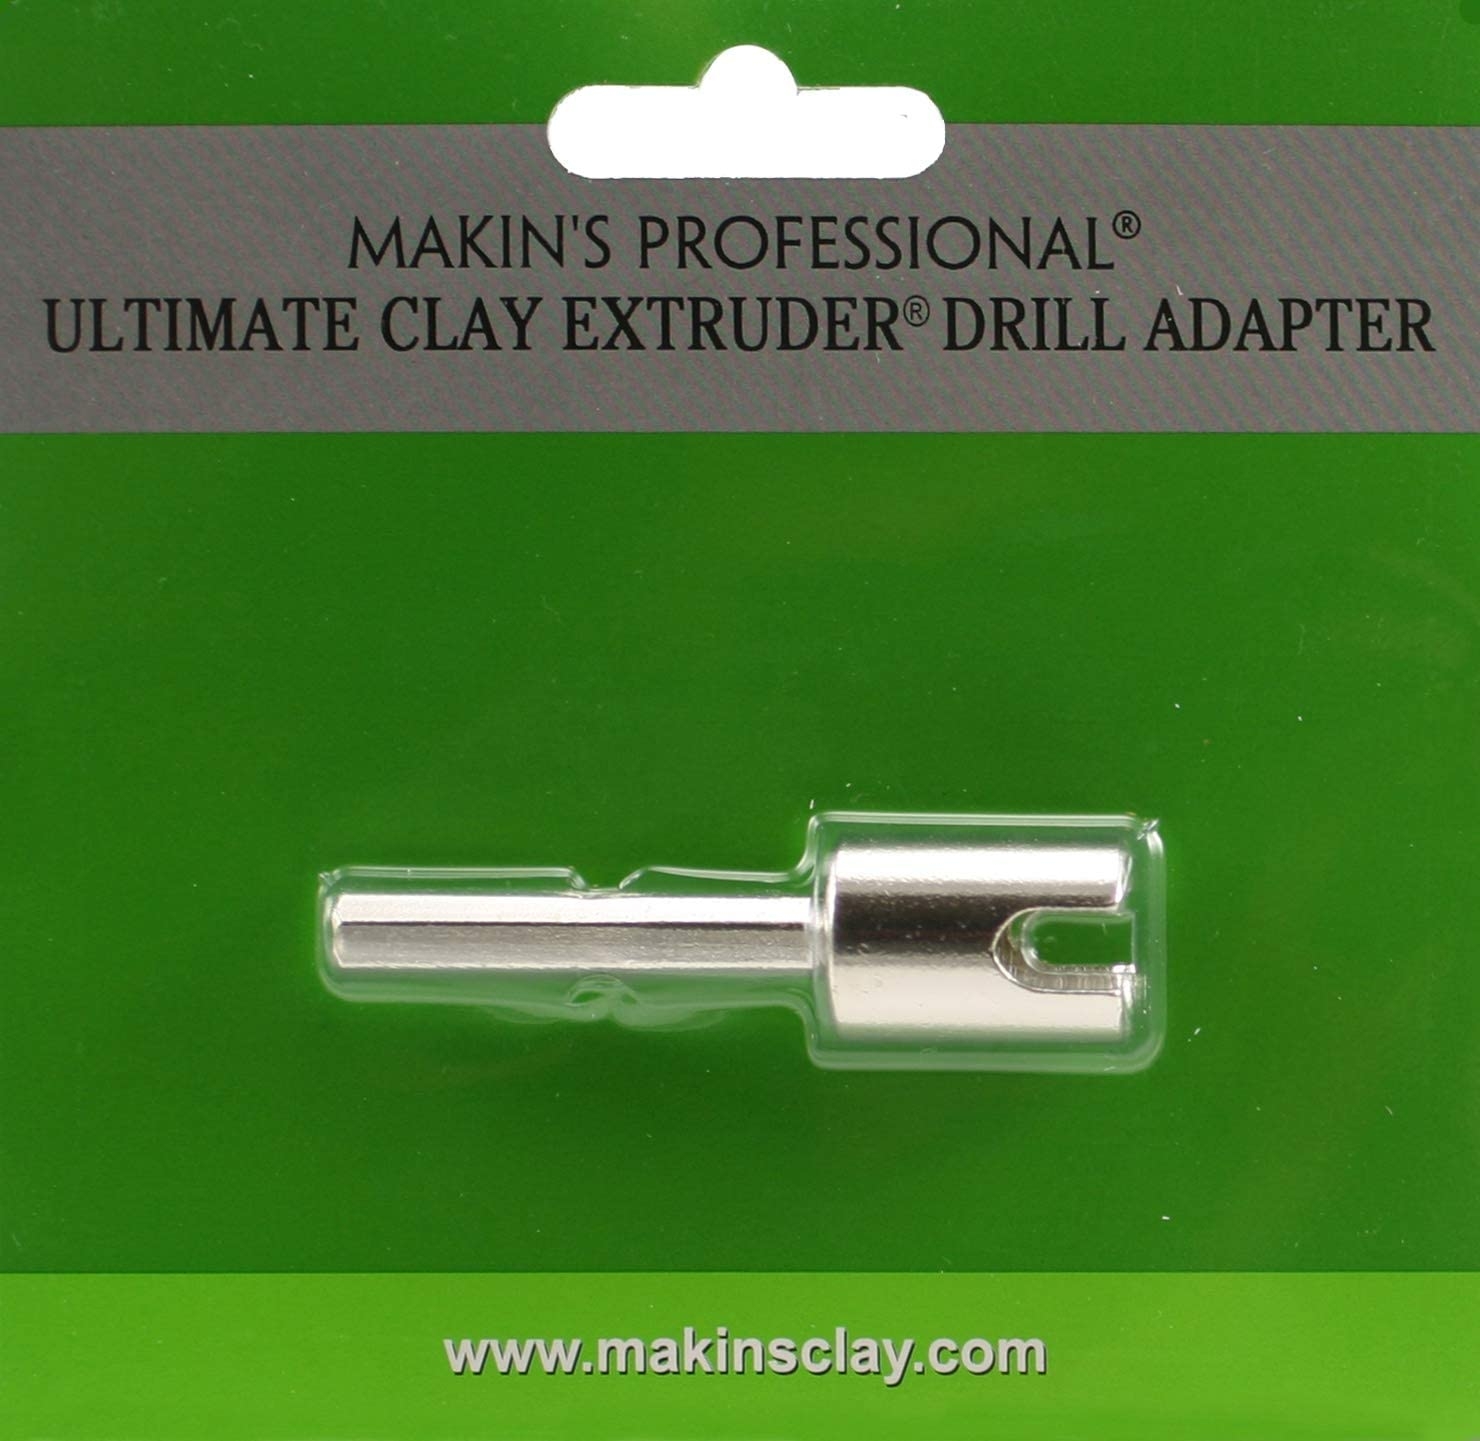 Makin’s USA Makin’s Professional Ultimate Clay Extruder Drill Adapter, Silver Import To Shop ×Product customization General